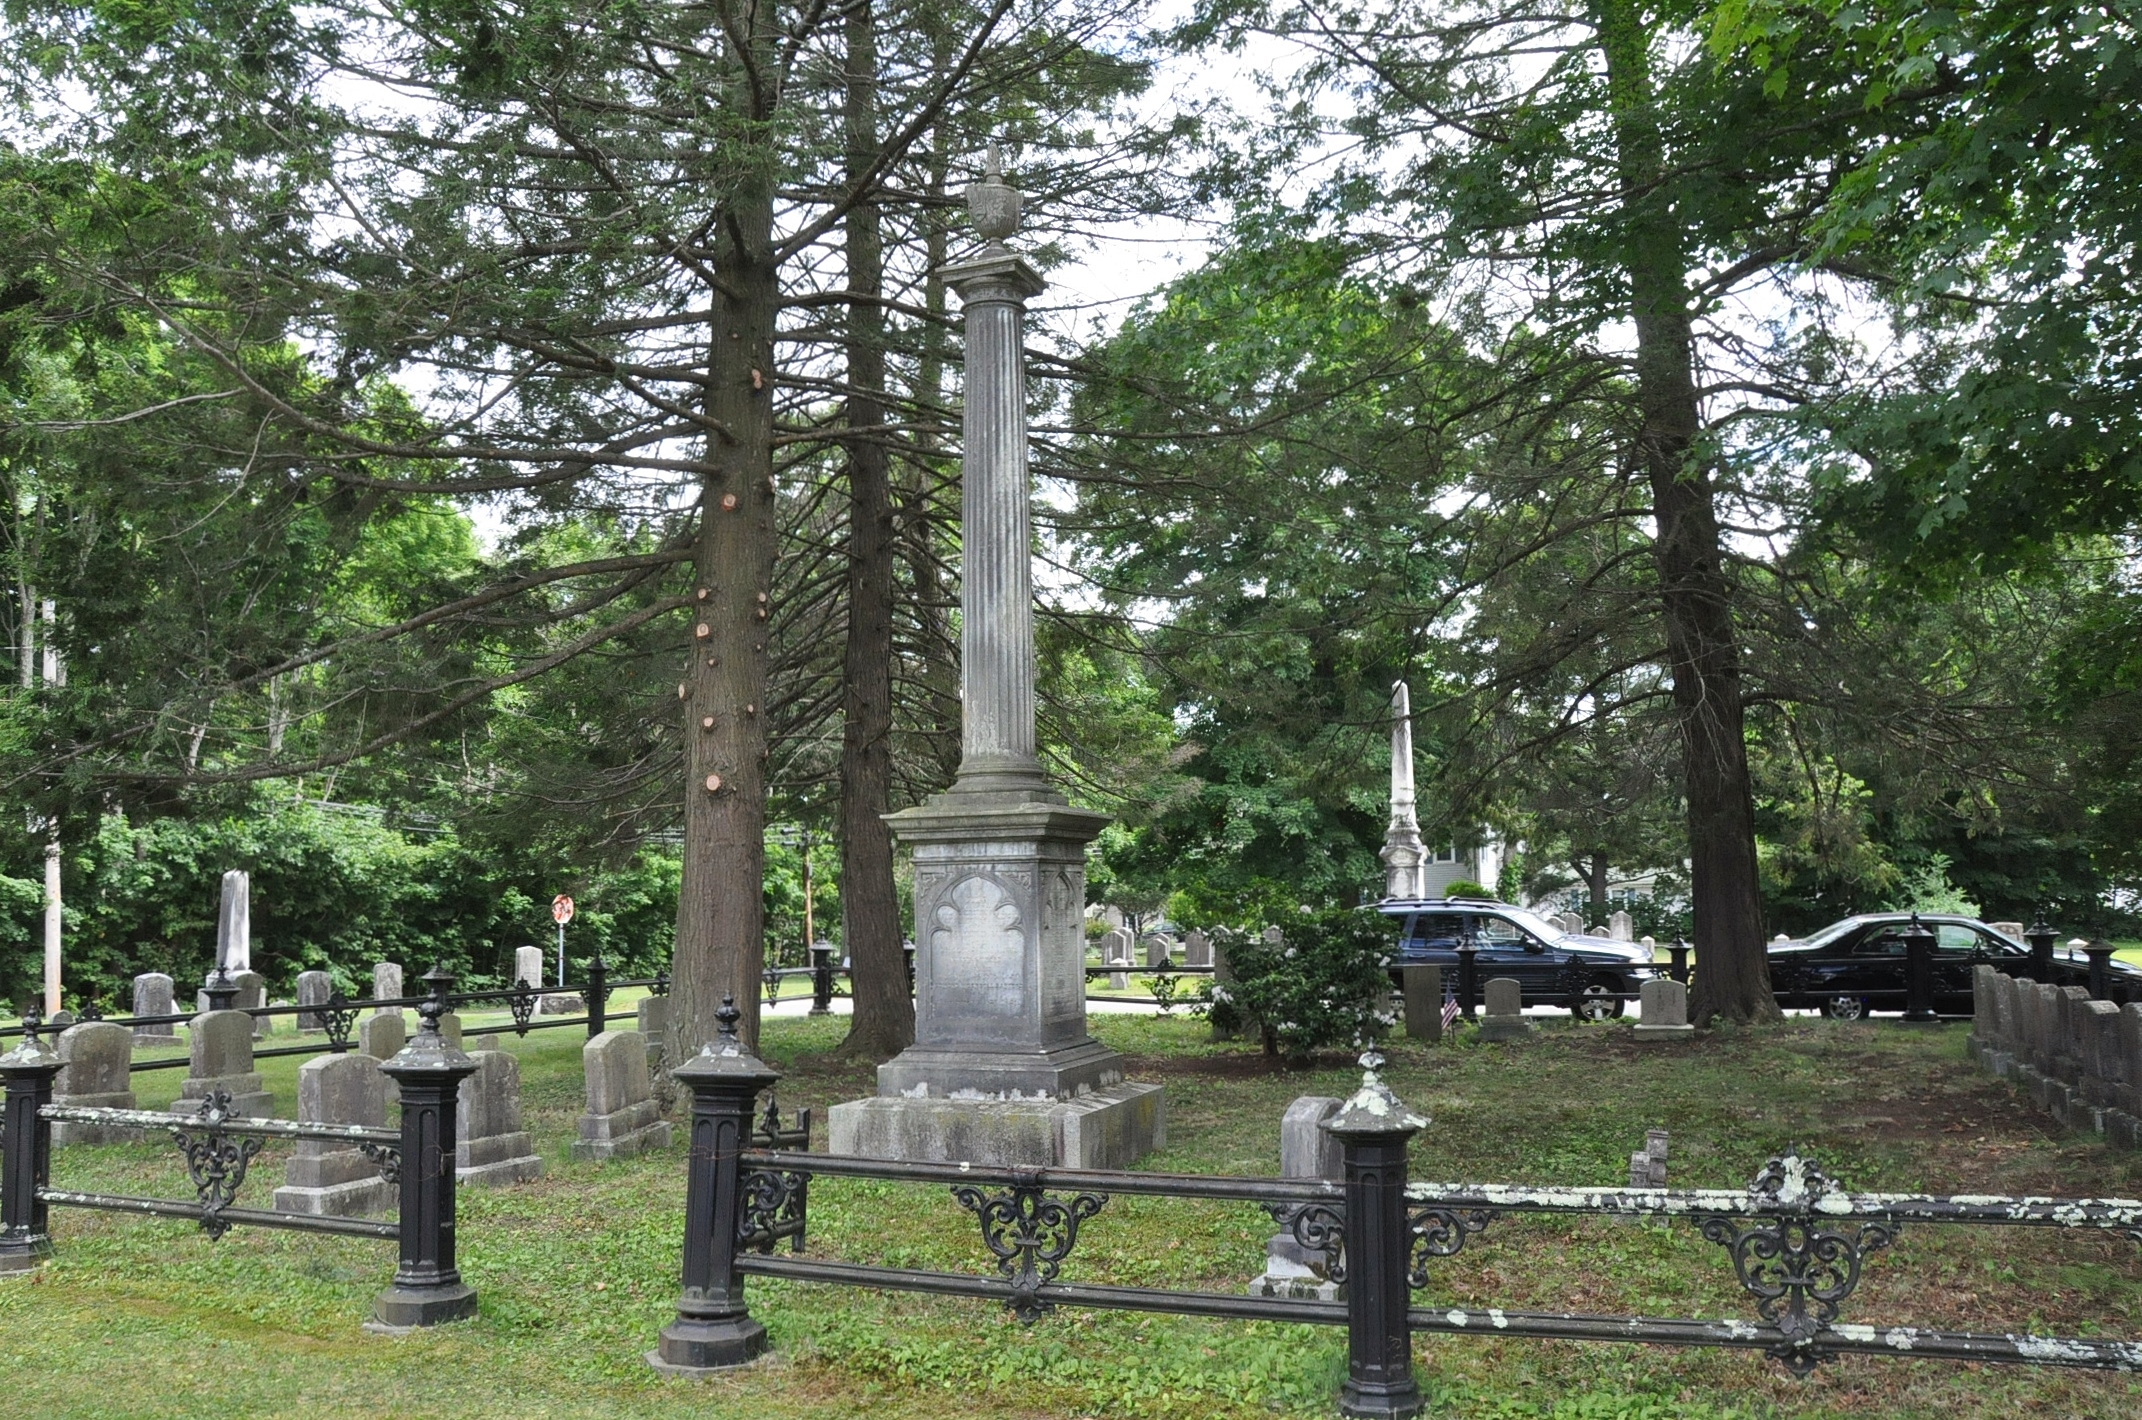 Down to New England 5: Monuments, Memorials and Memories